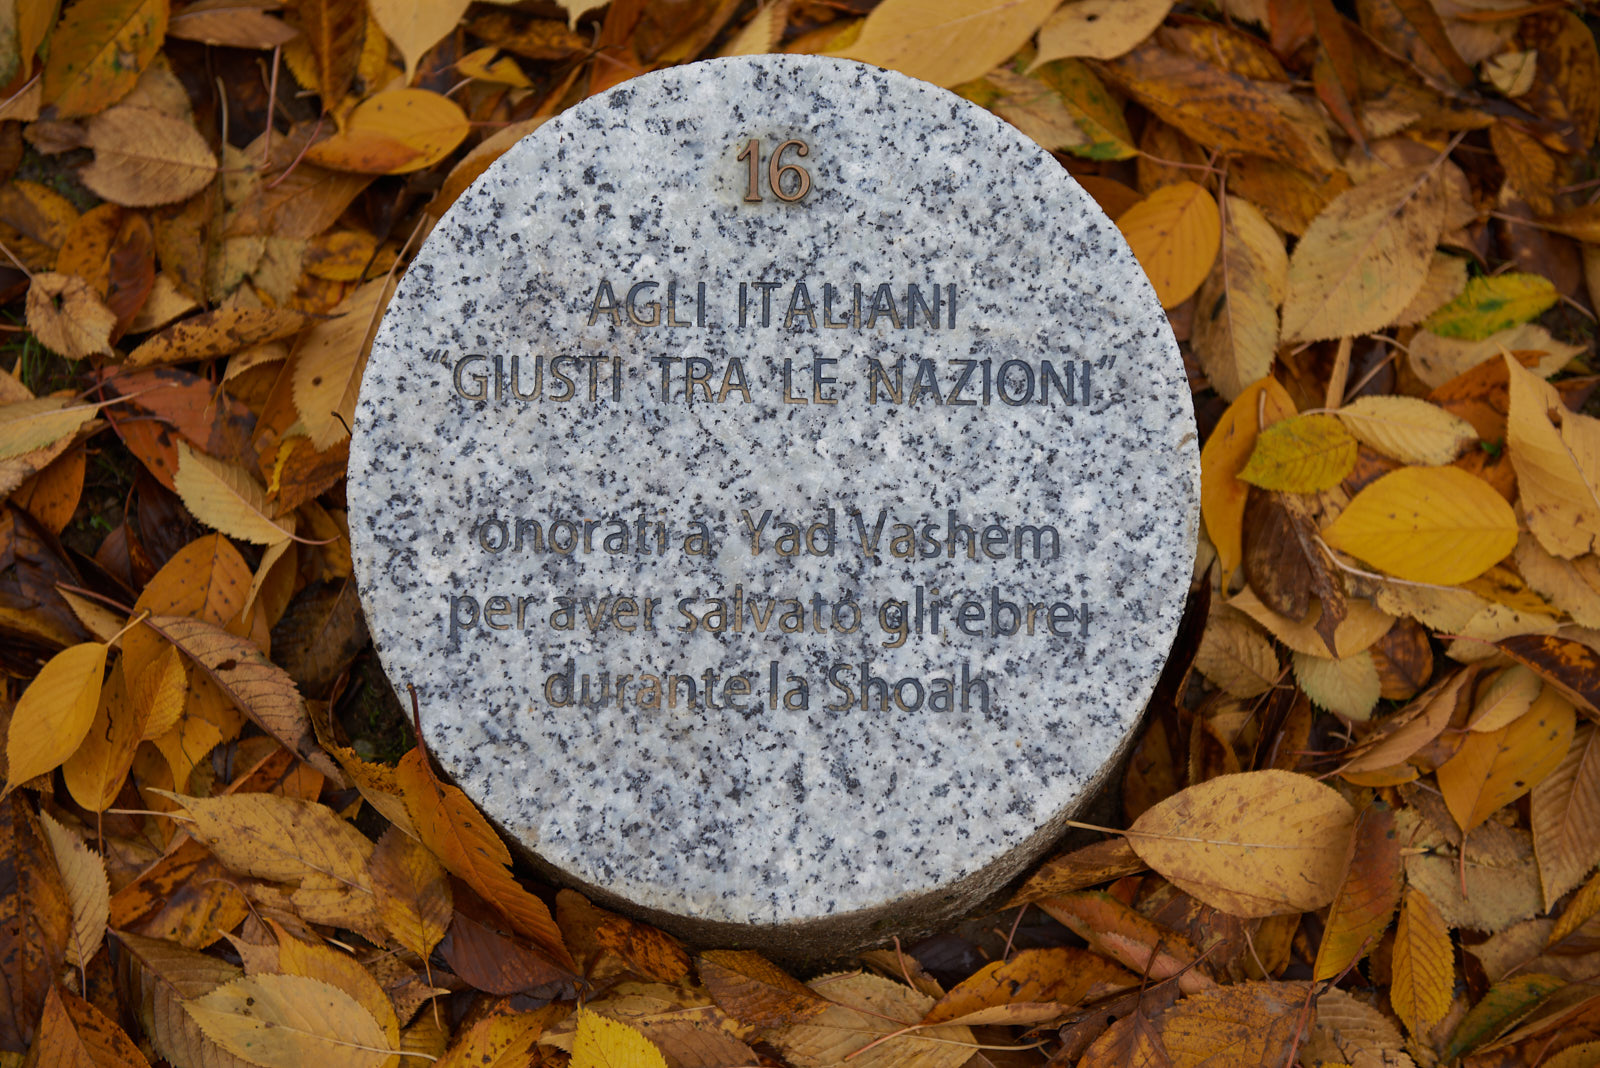 The memorial stone dedicated to Italians Righteous among the Nations